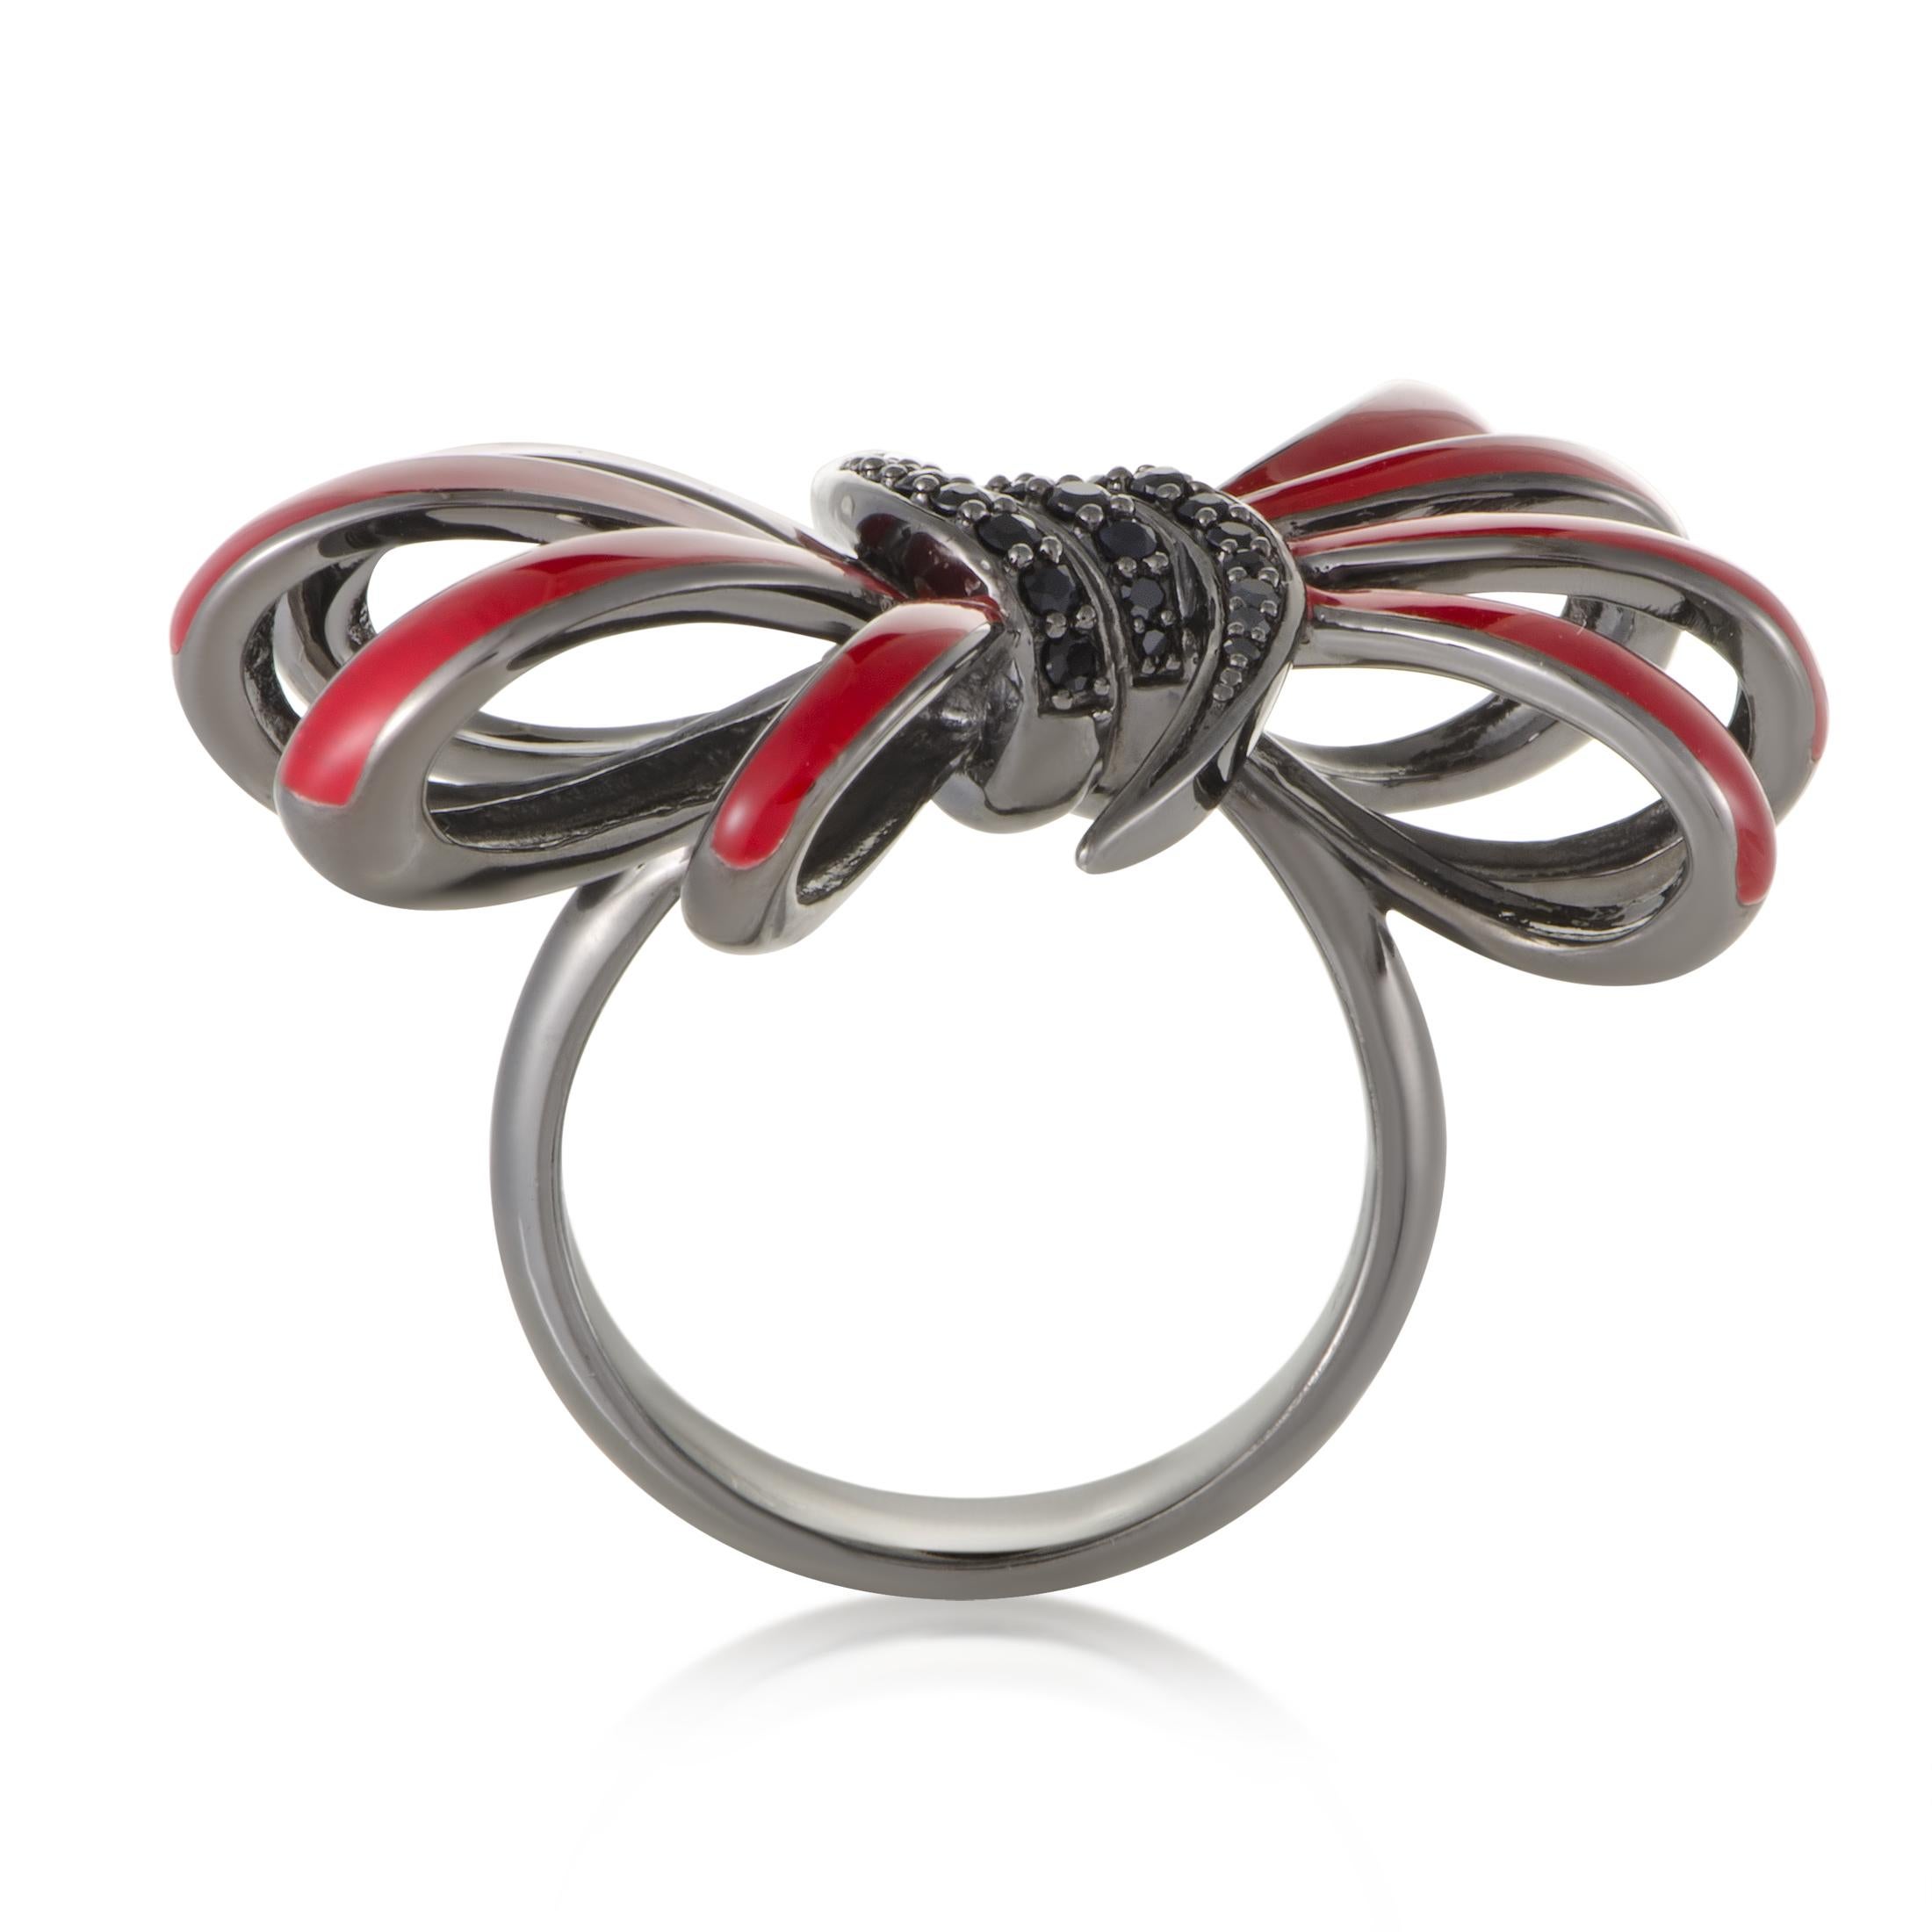 The beautifully marvelous motif of a bow is artistically presented in fiery red enamel to produce an absolutely stunning contrast against the polished black rhodium-plated silver and captivating black sapphires, that amount to 0.26 carats, in this